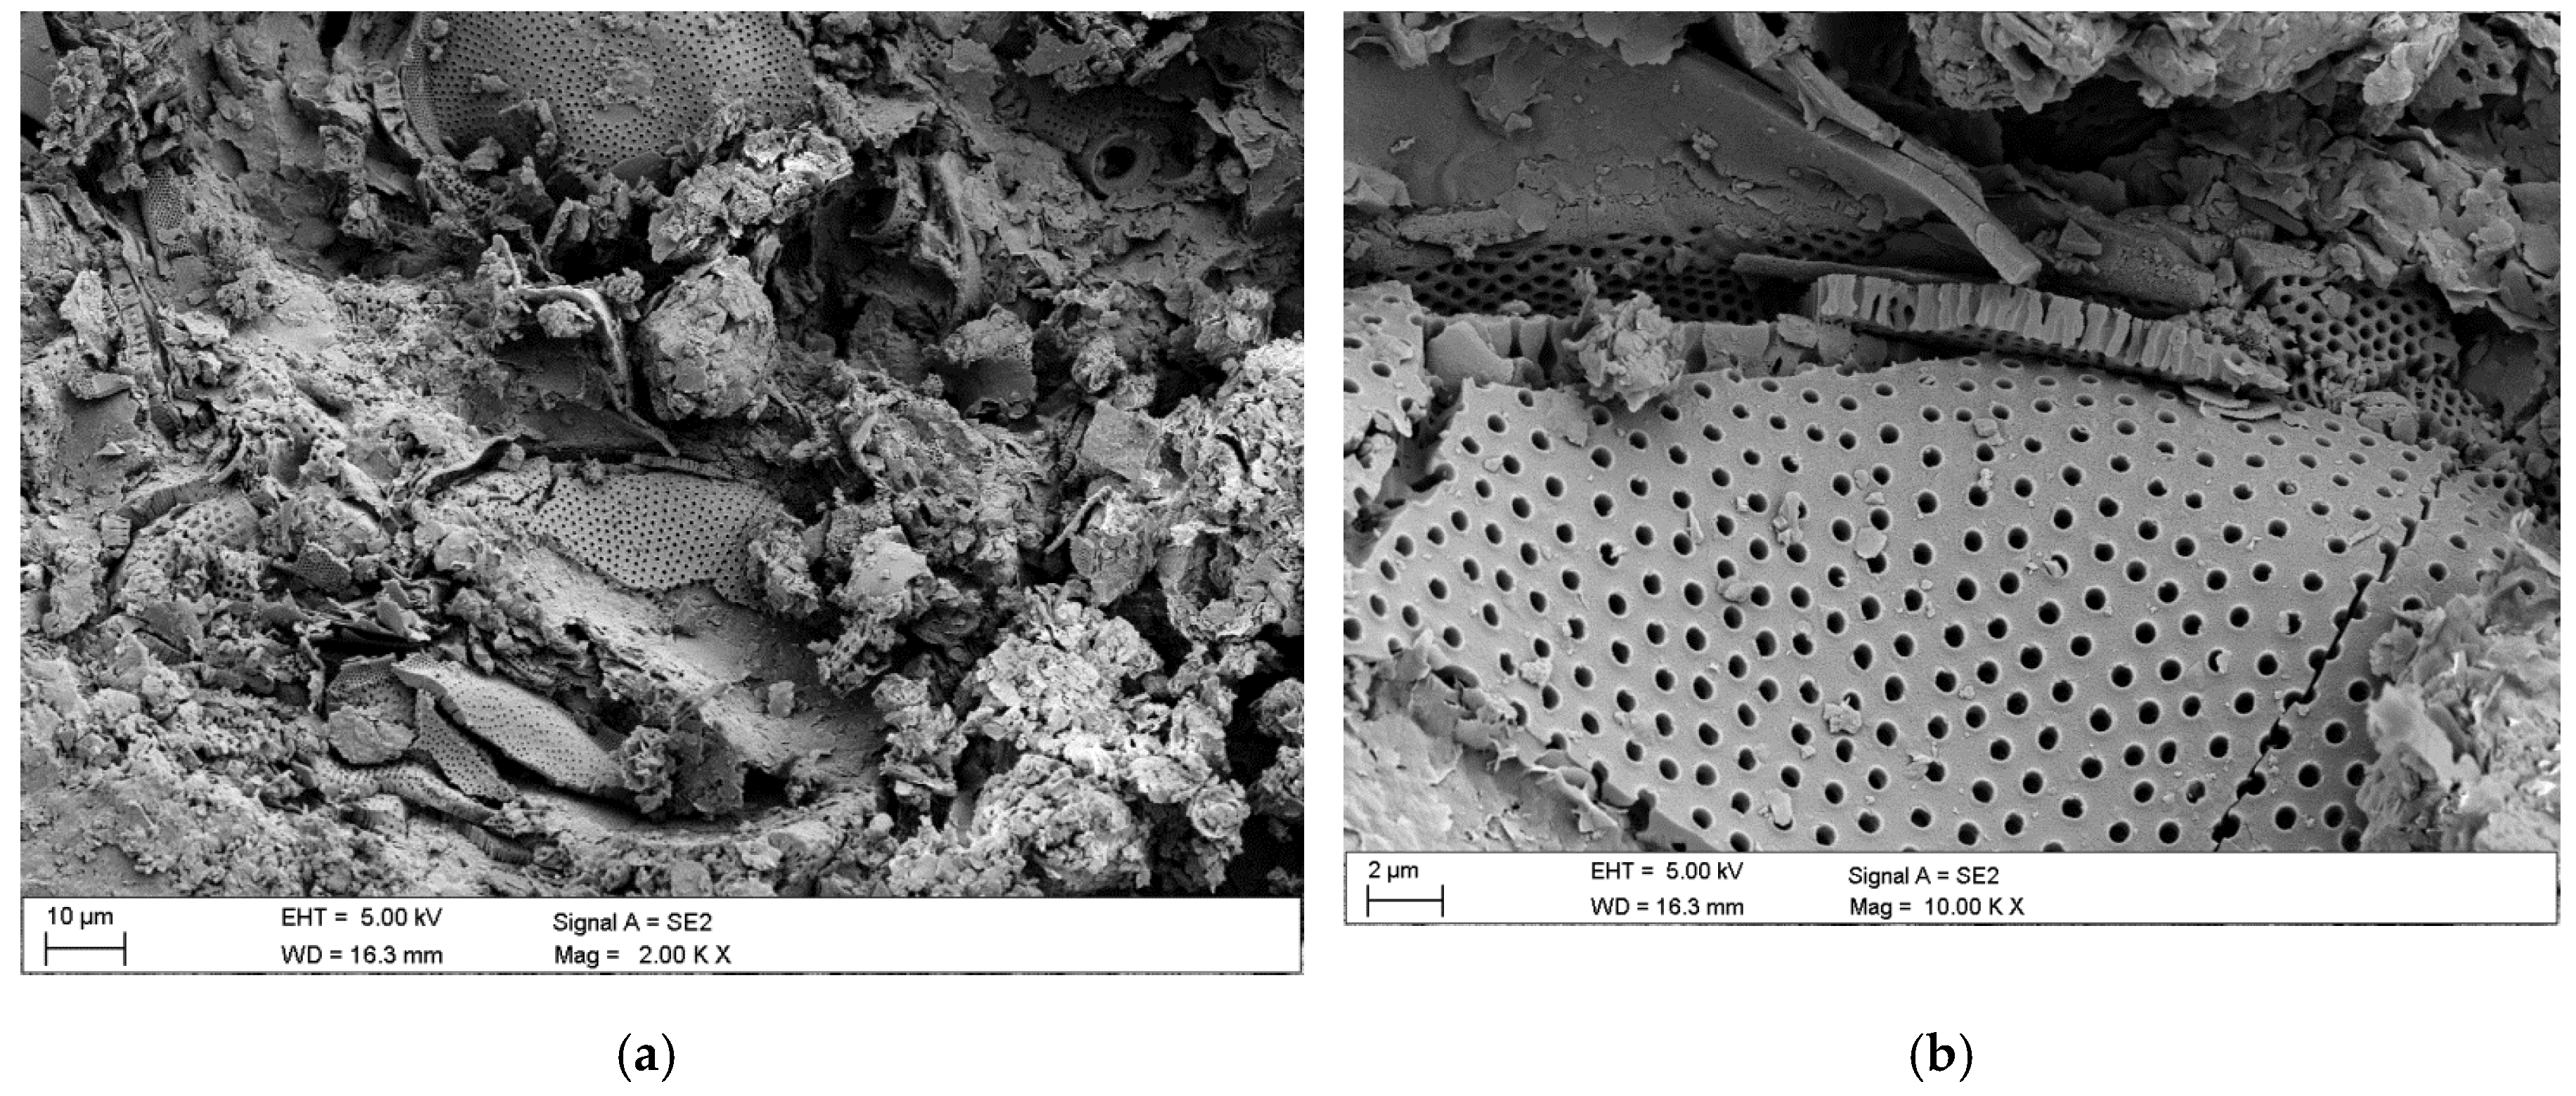 Minerals Free Full Text Characterization Of Diatomaceous Earth And Halloysite Resources Of Poland Html